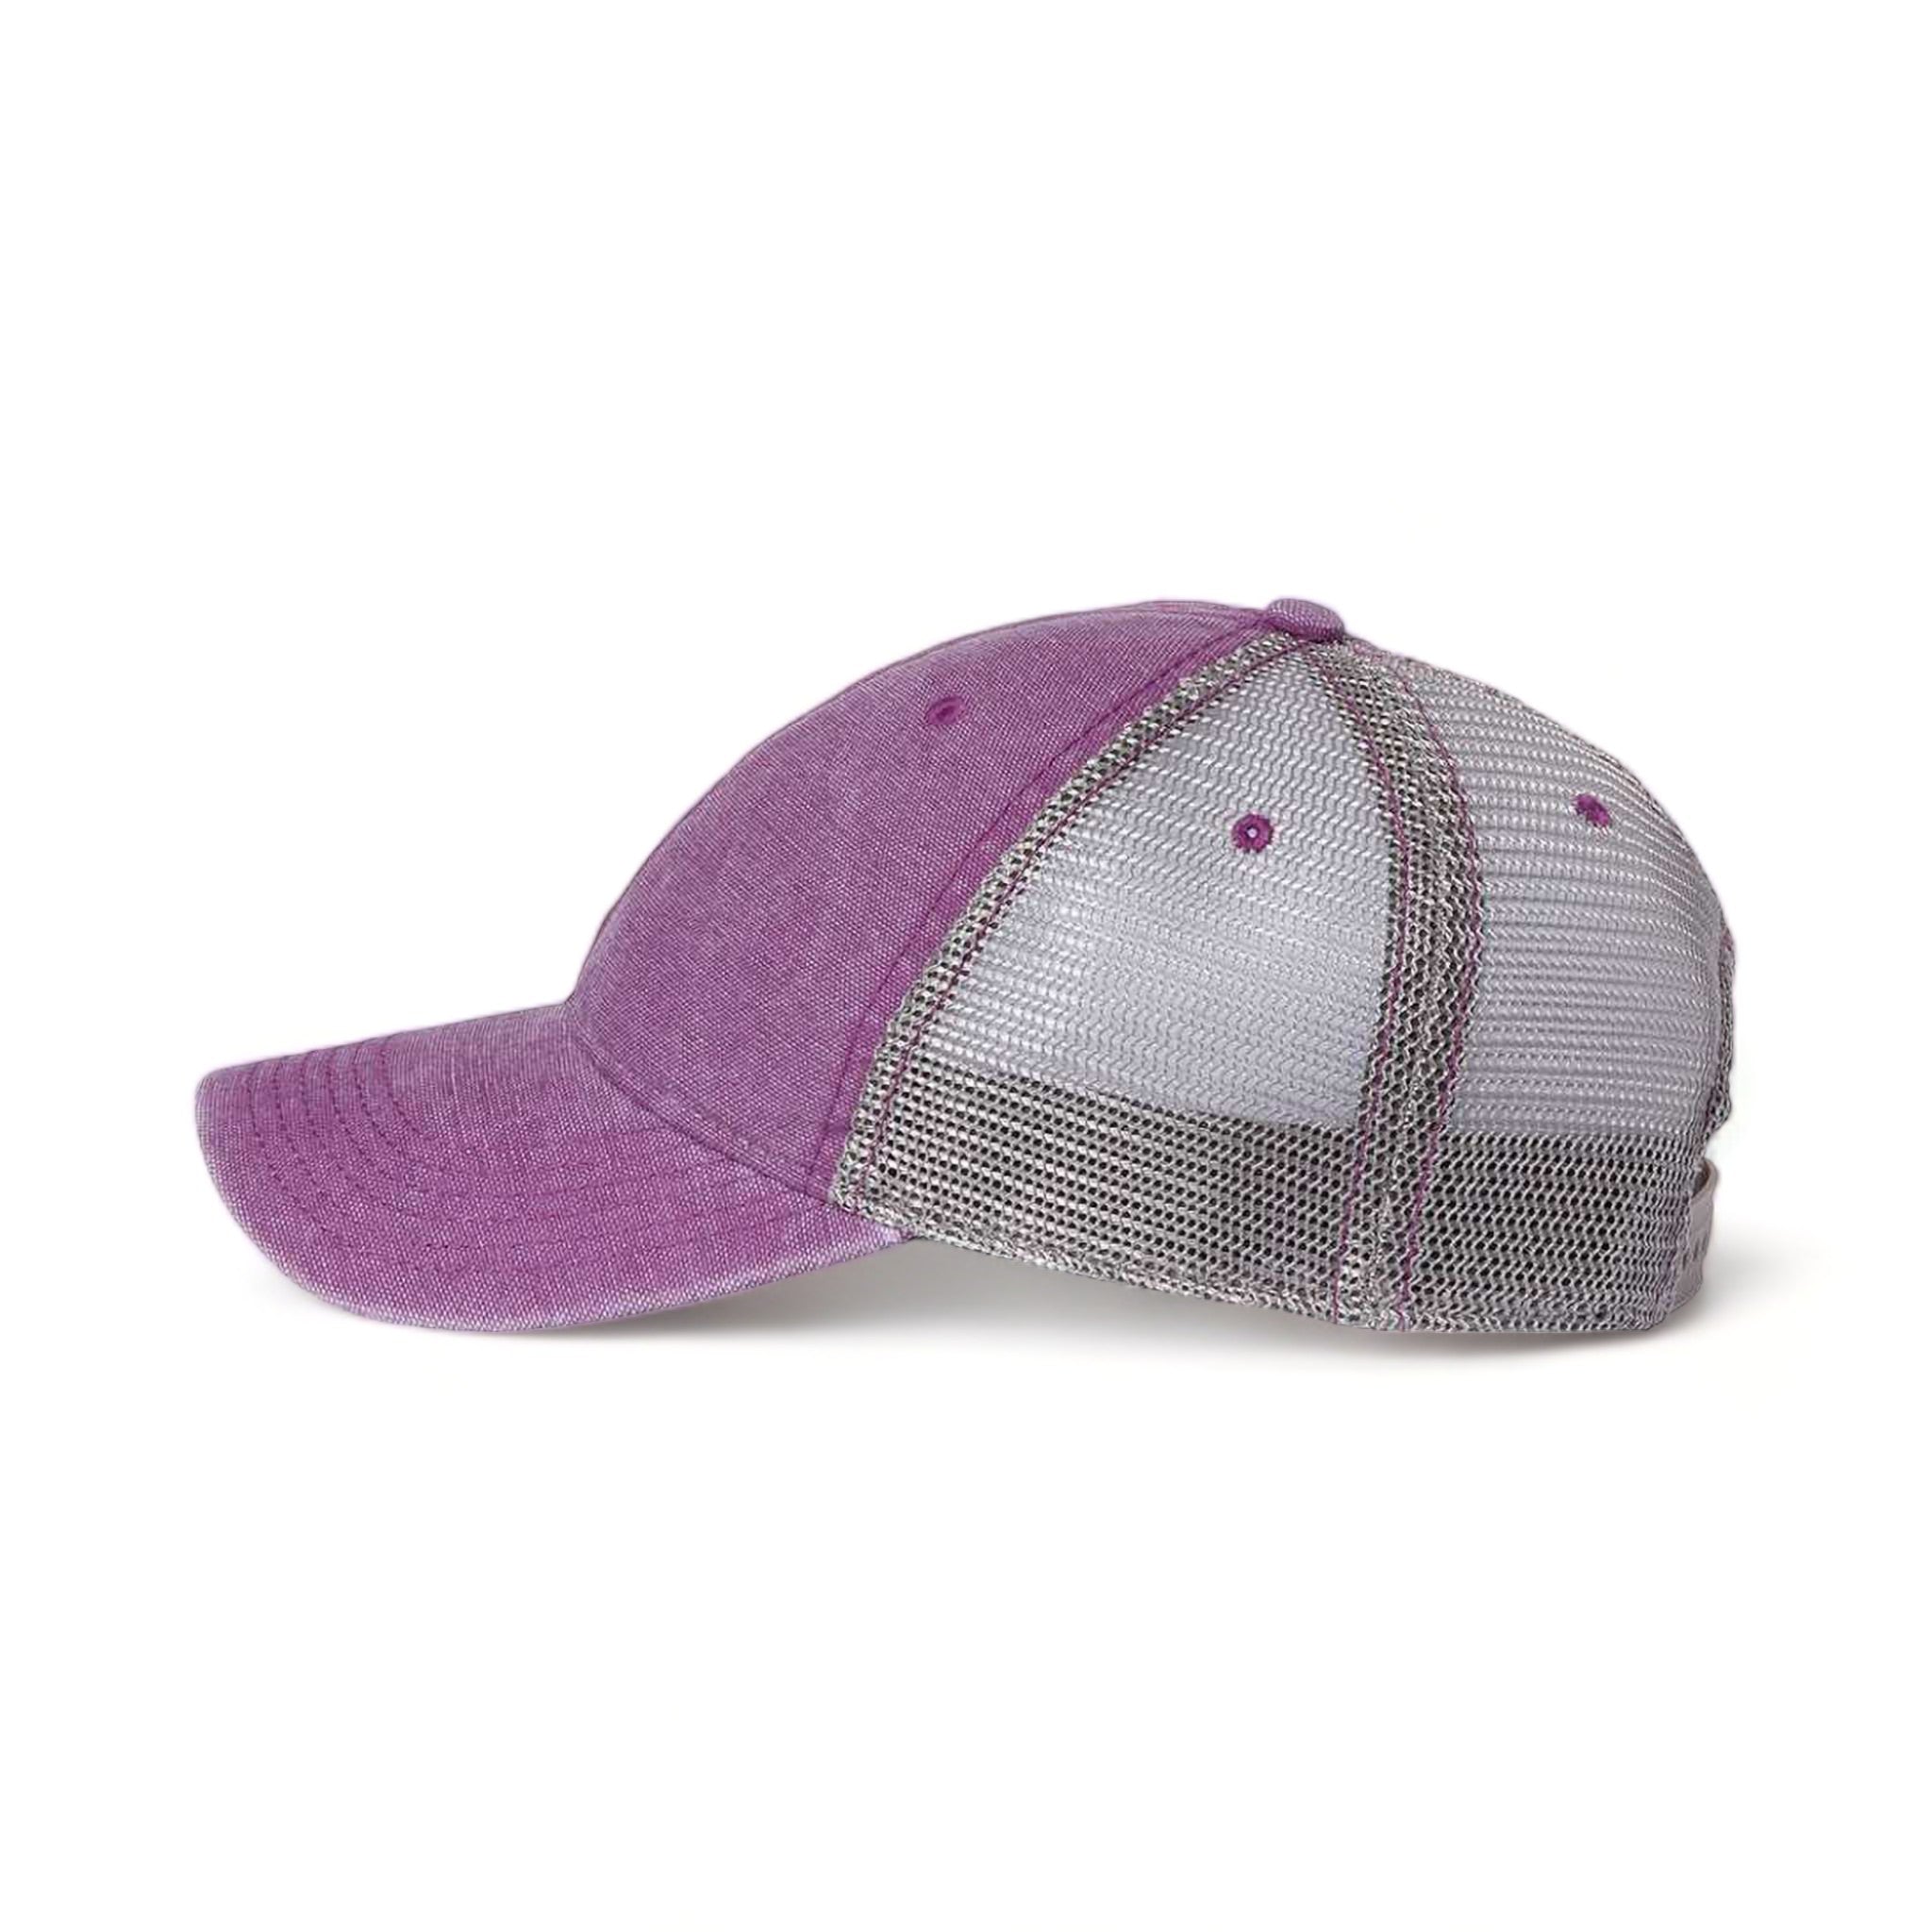 Side view of LEGACY DTA custom hat in orchid and grey